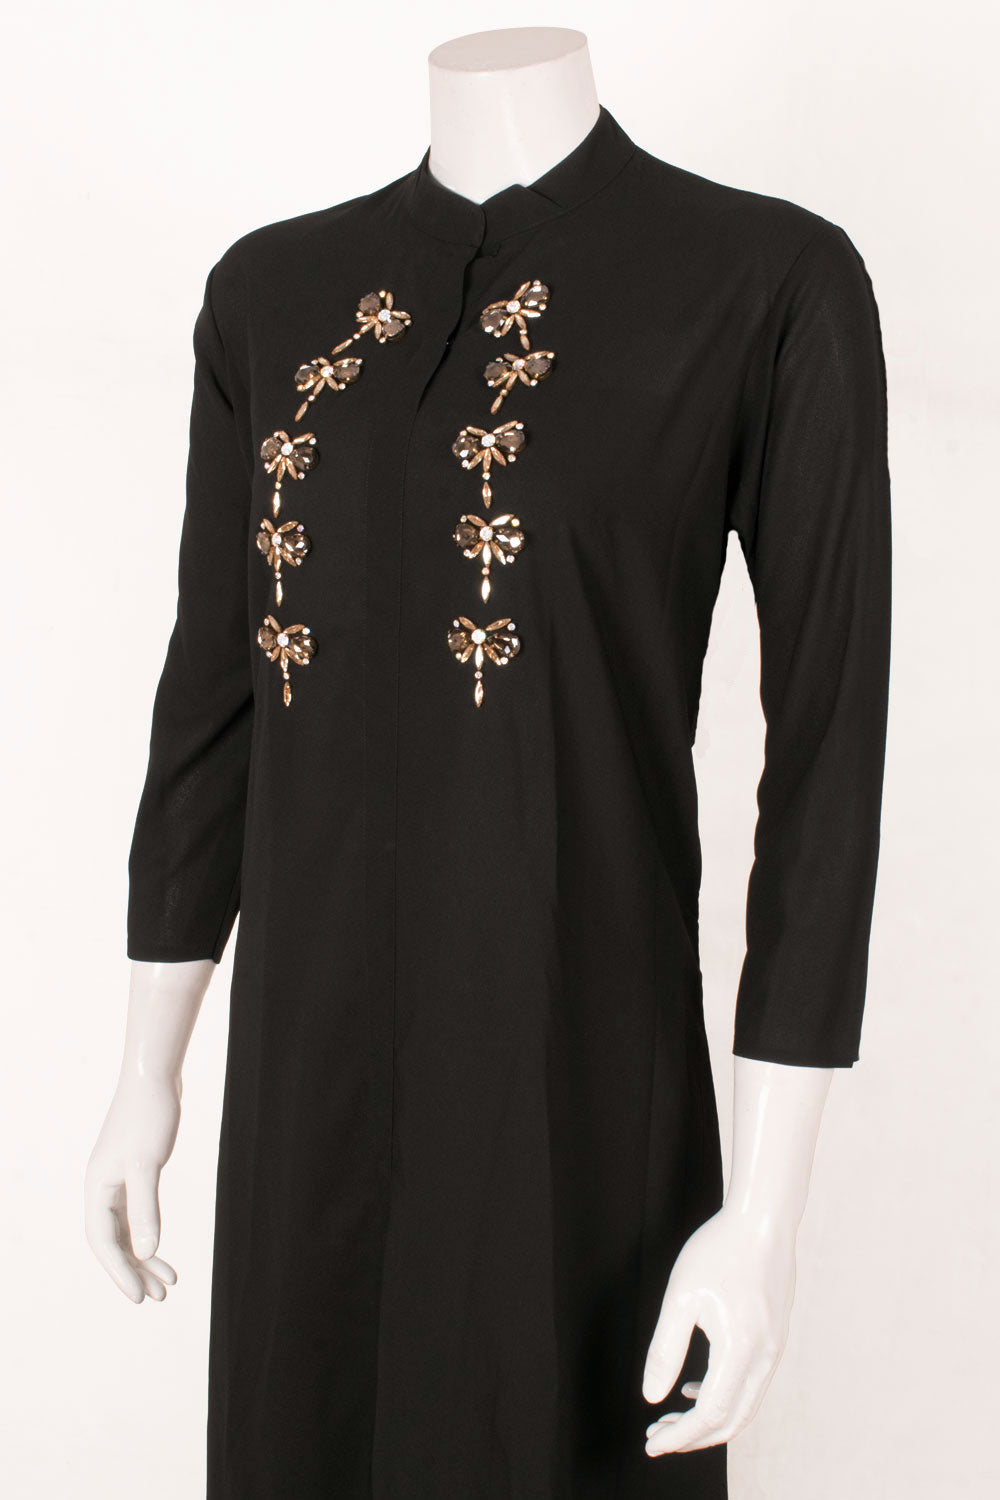 Handcrafted Georgette Dress with Embellished Yoke and Chinese Collar